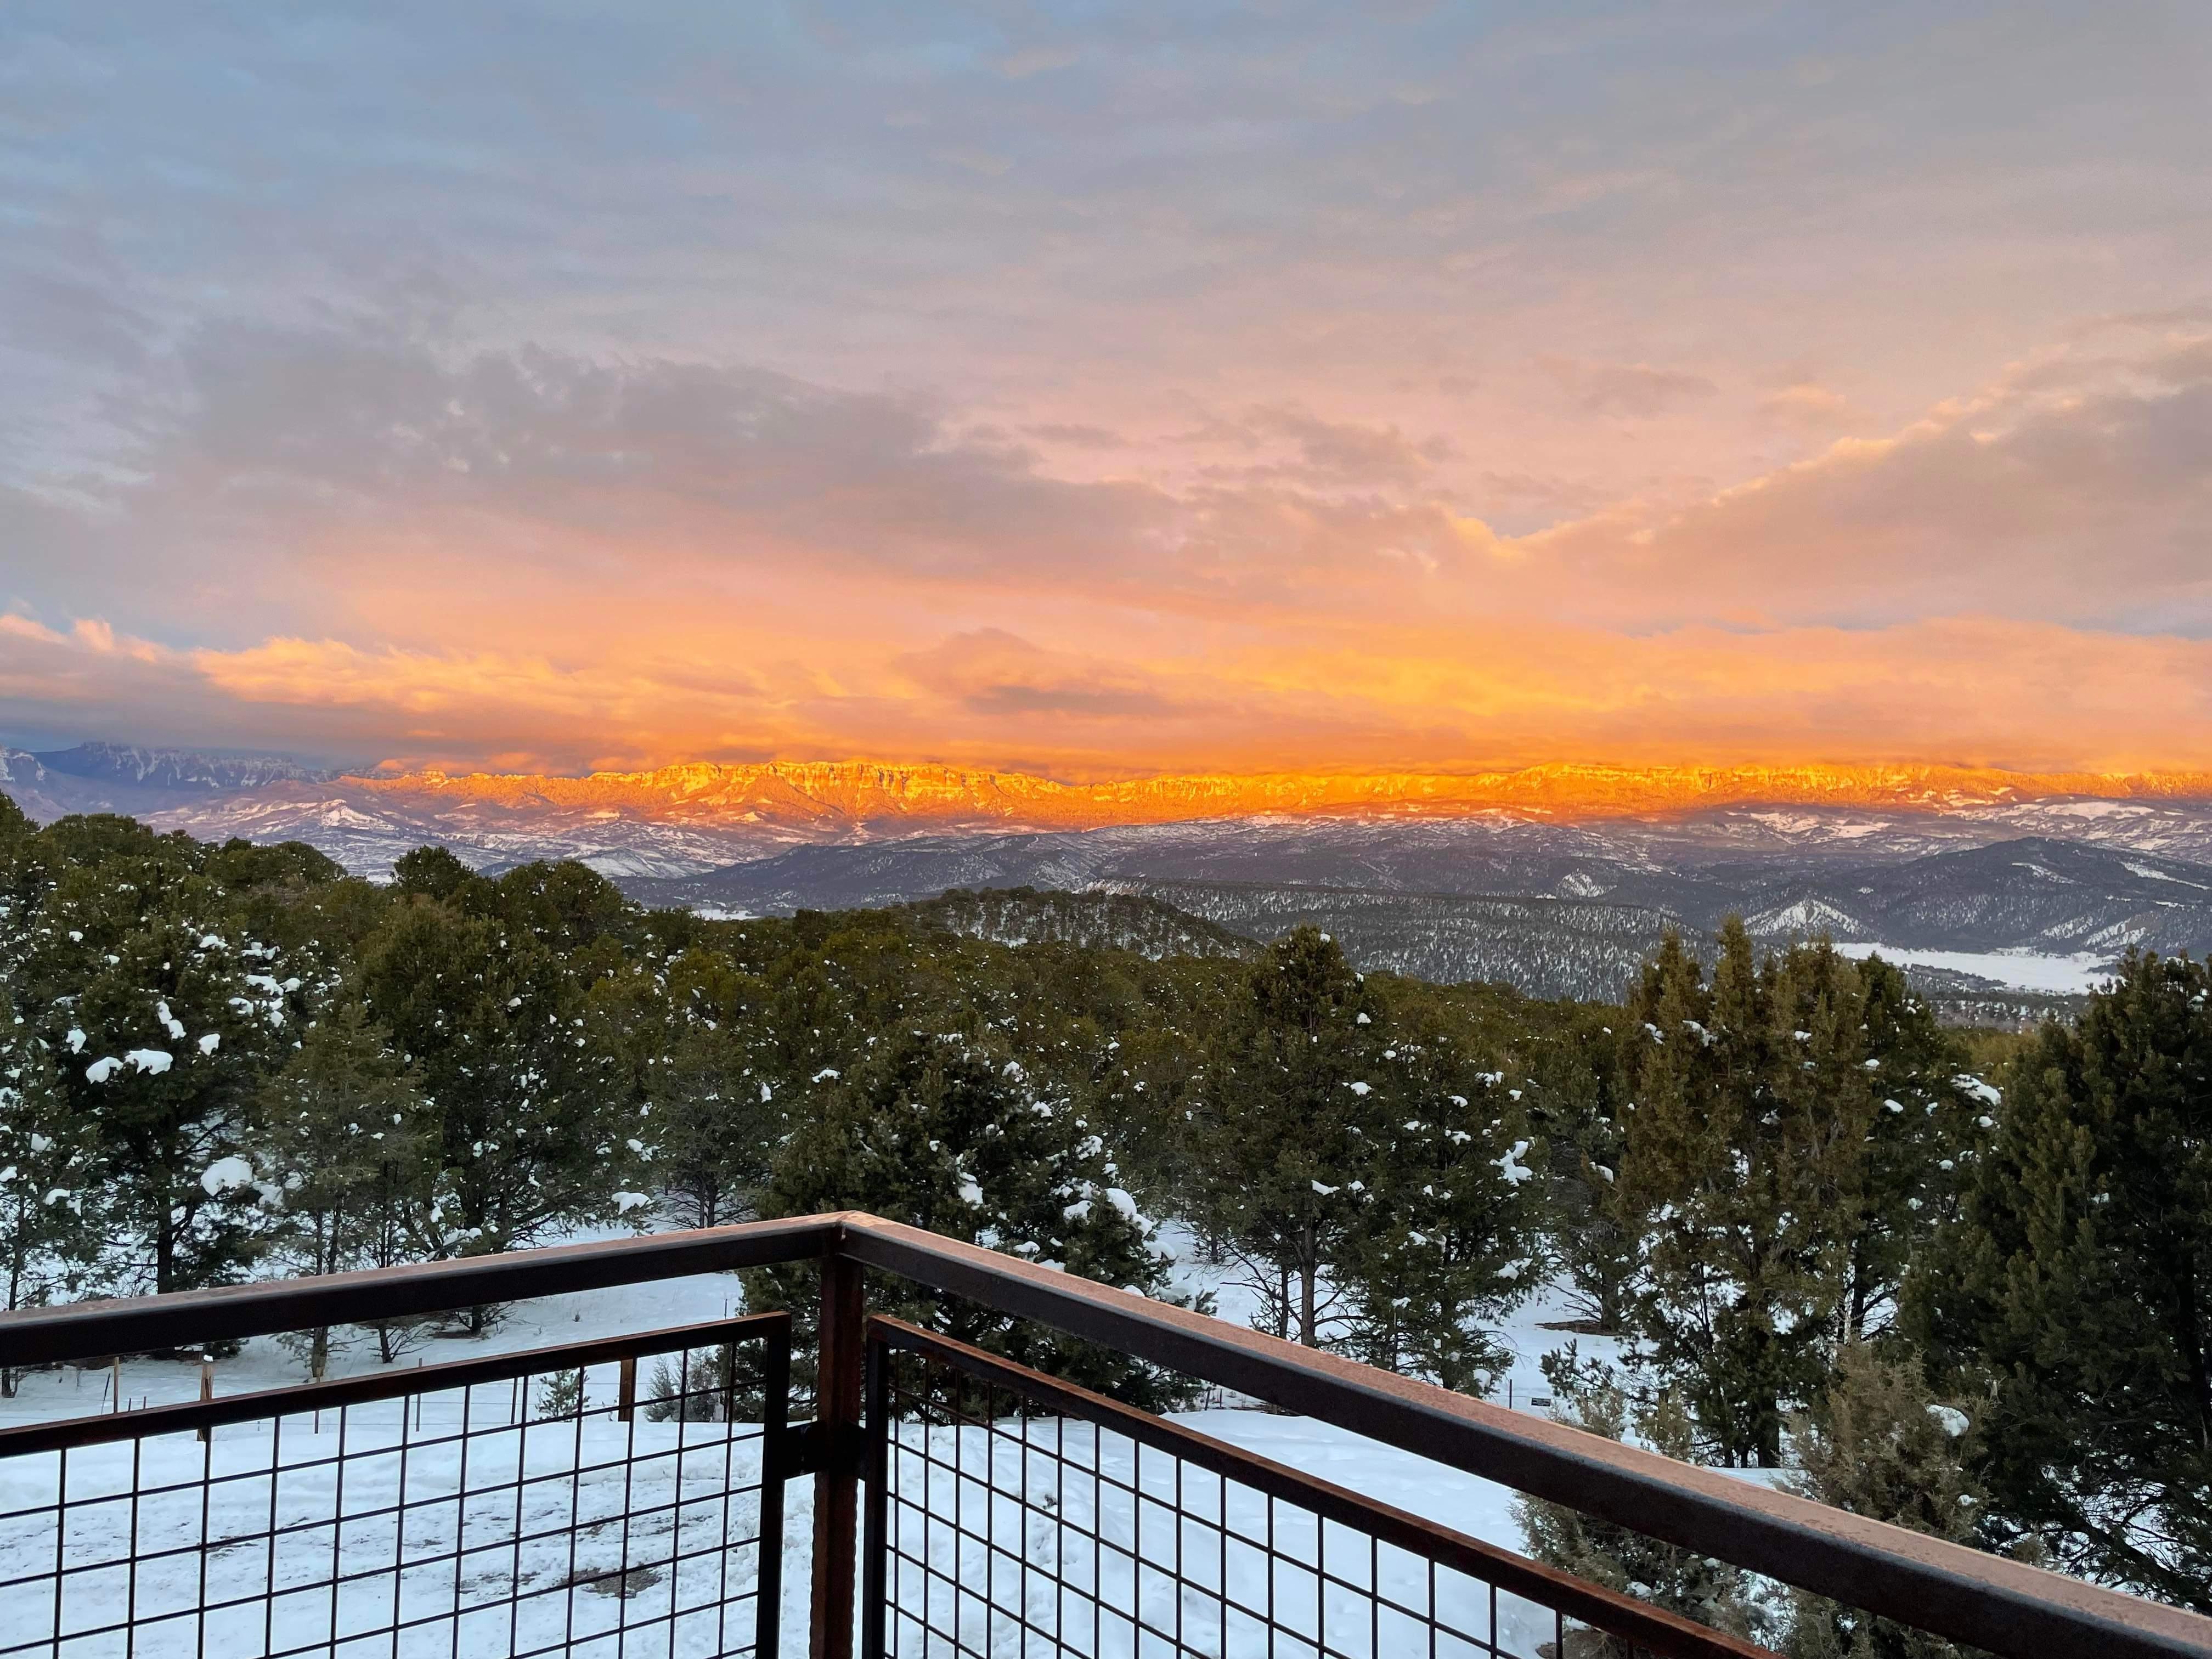 You can't beat the sunsets in western Colorado!